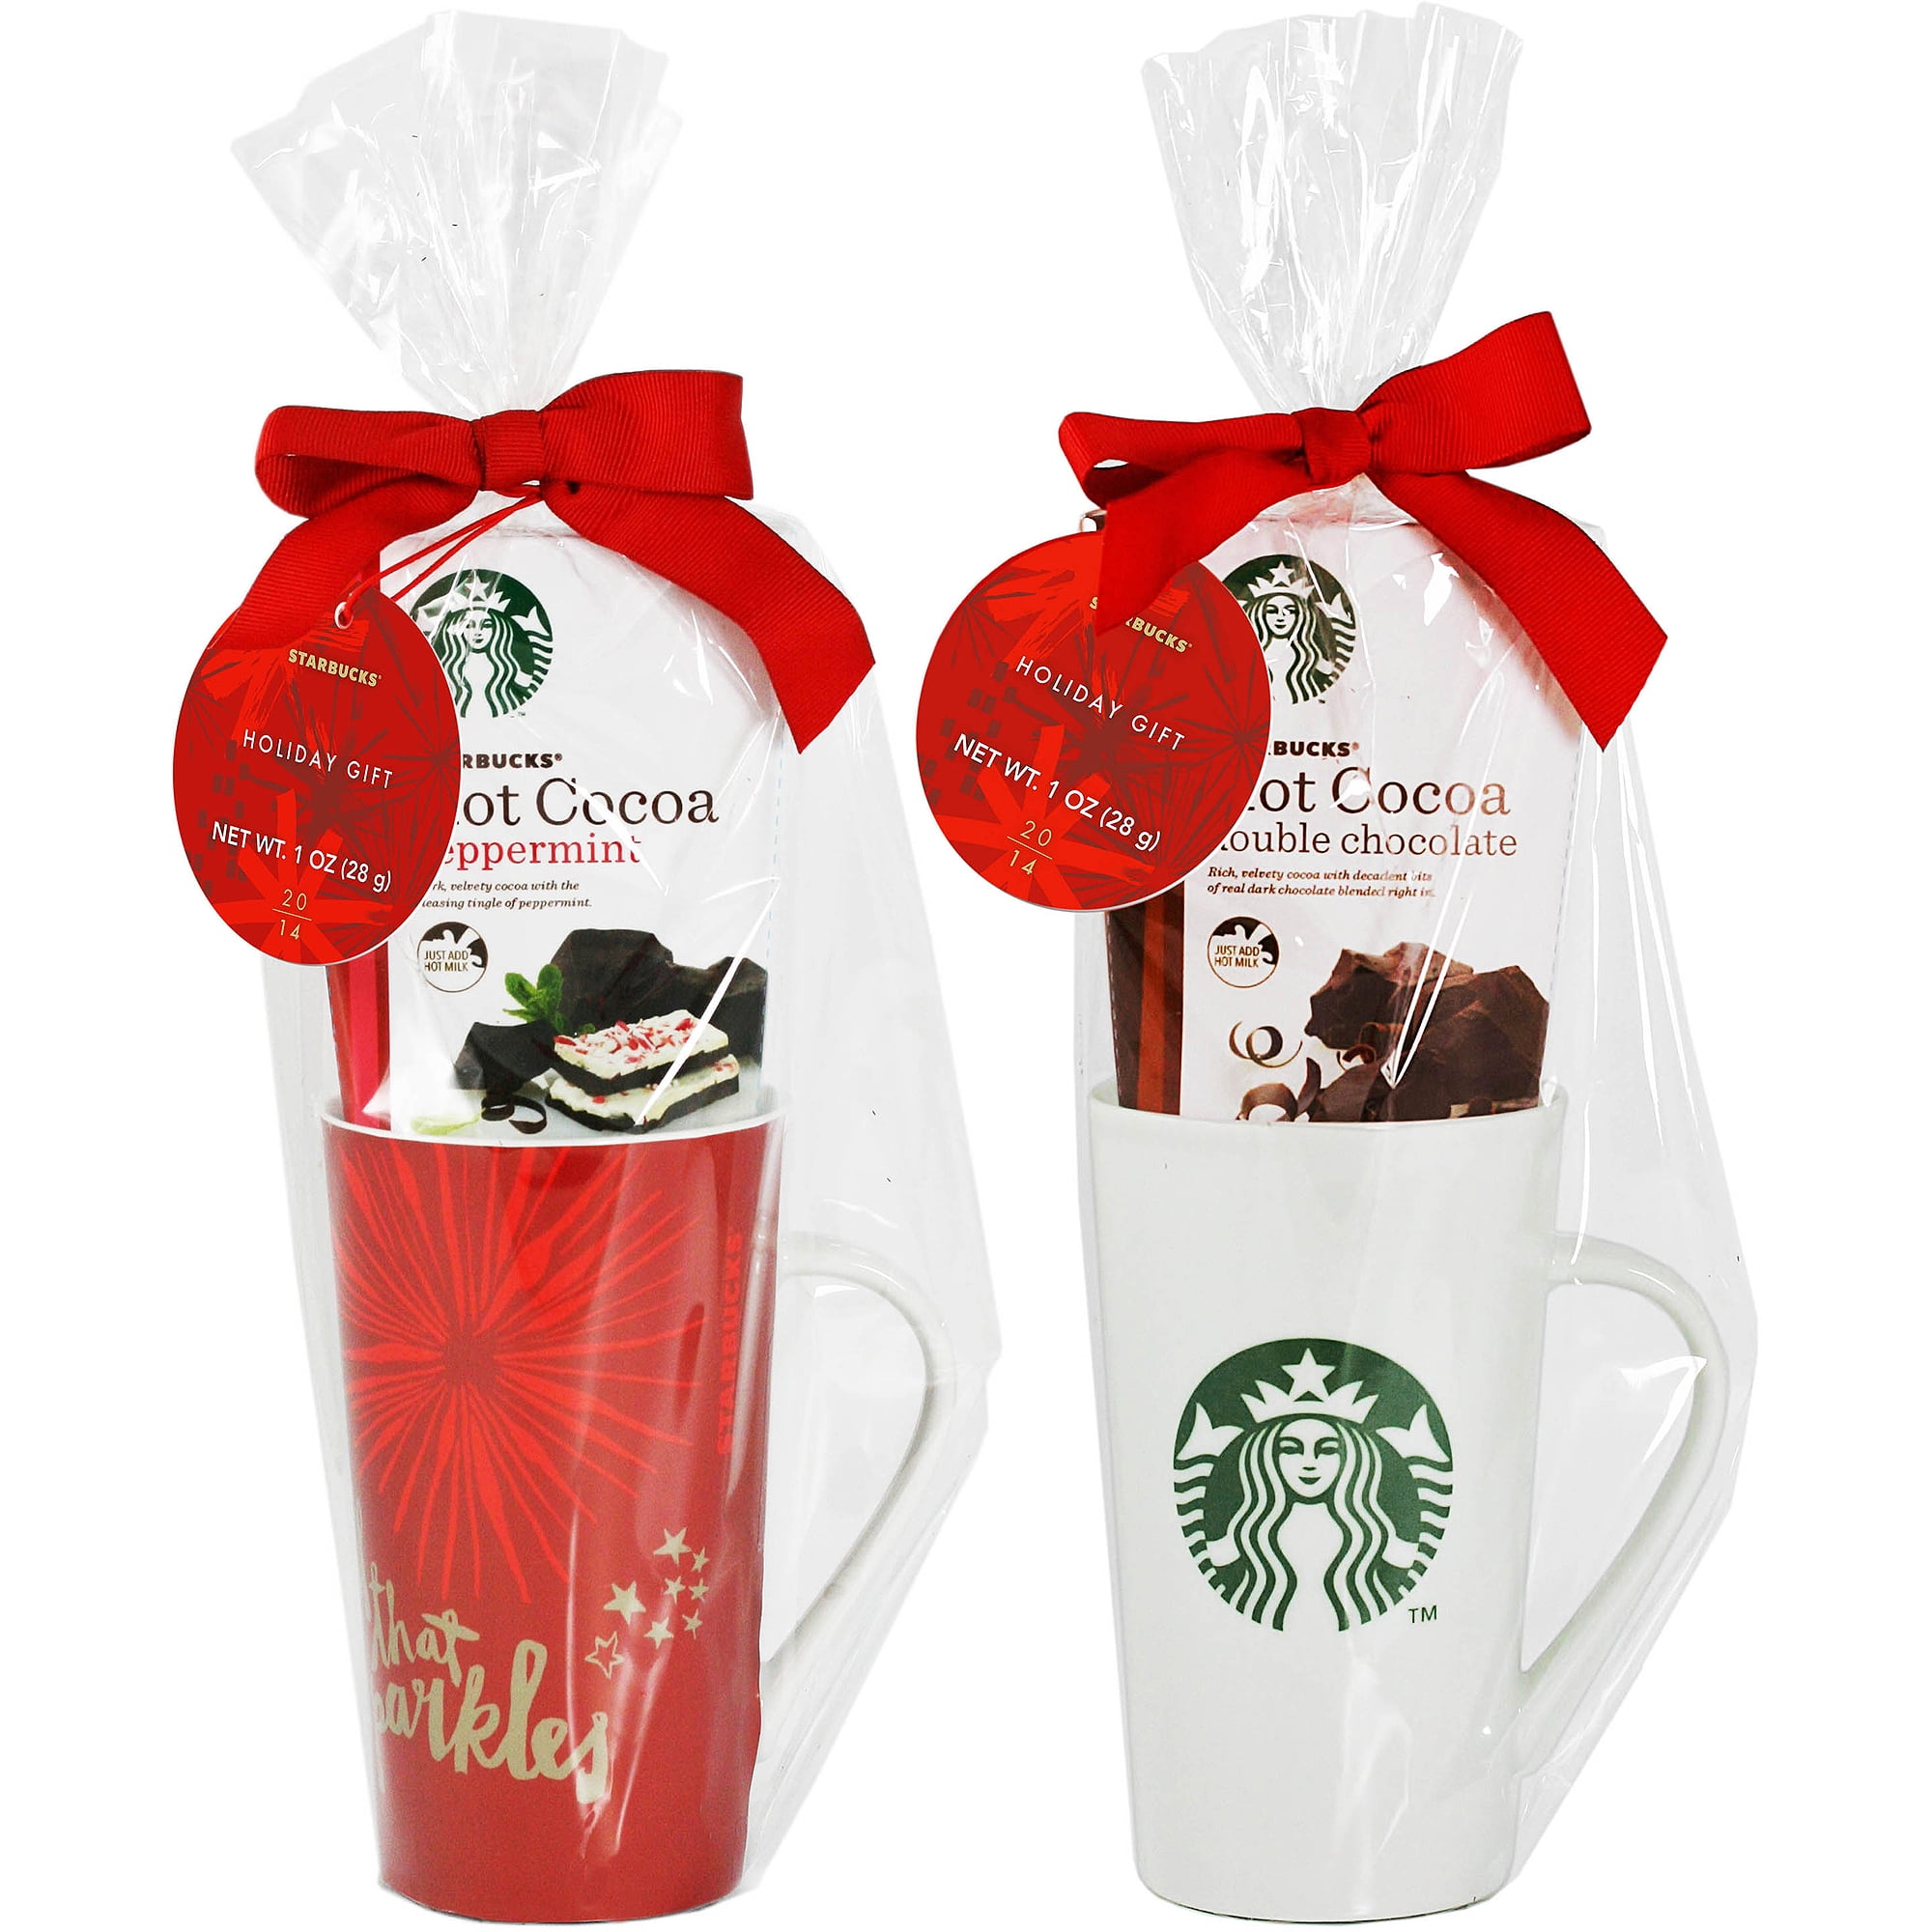 Coffee Cup Gift Sets Uk - Interior Design & Decorating Ideas